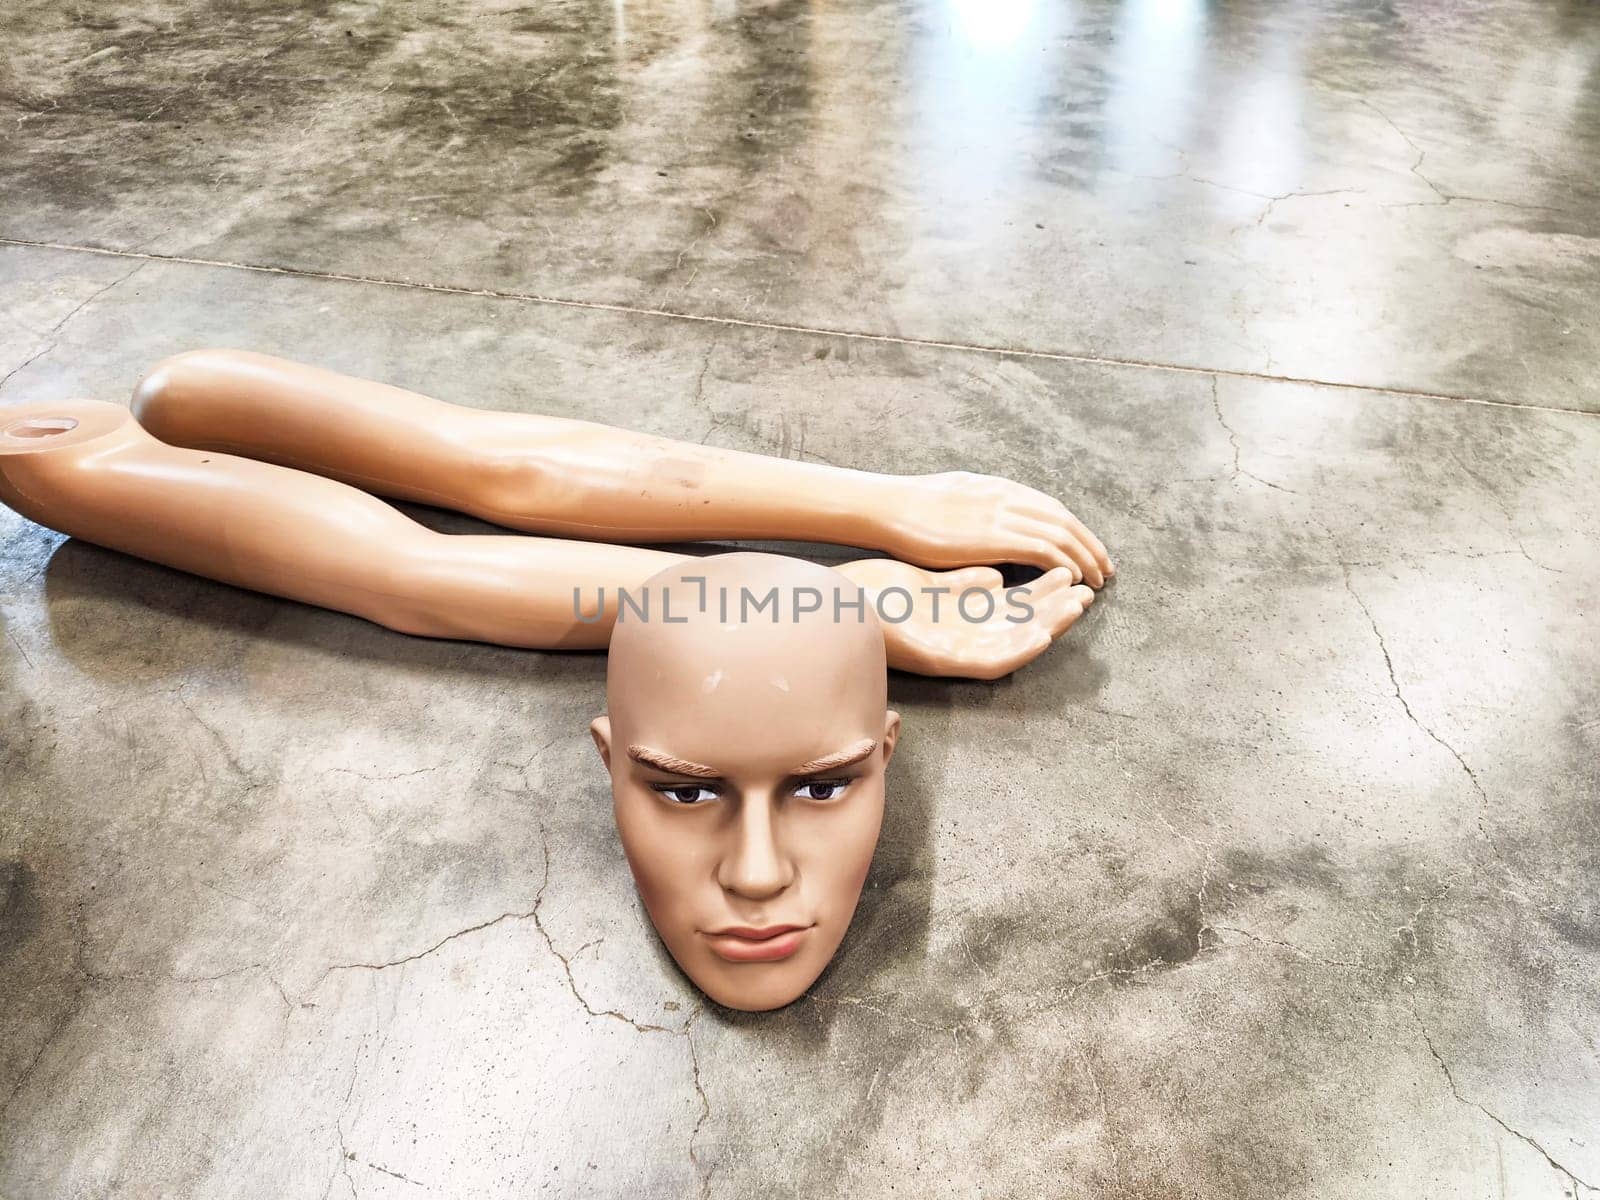 Disassembled Mannequin on Concrete Floor. Mannequin parts scattered on a polished surface by keleny